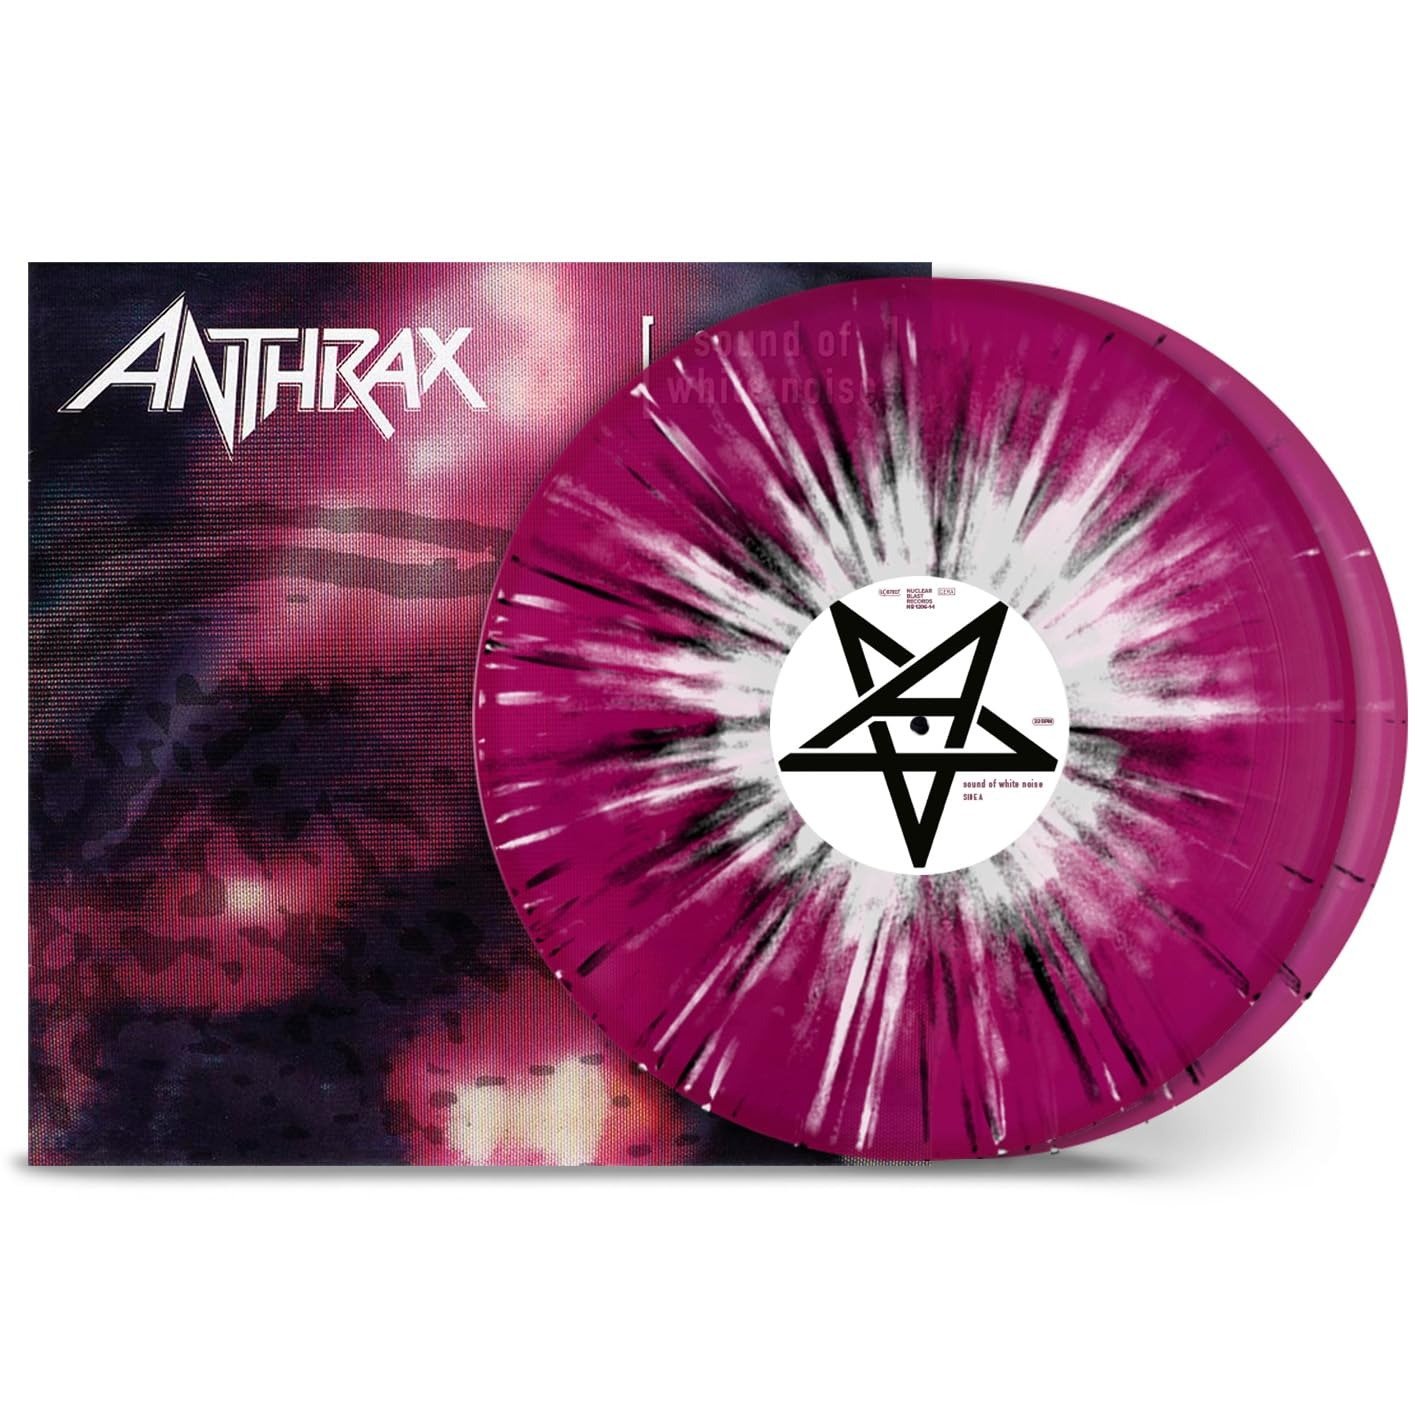 CD Shop - ANTHRAX SOUND OF WHITE NOISE COLORED L